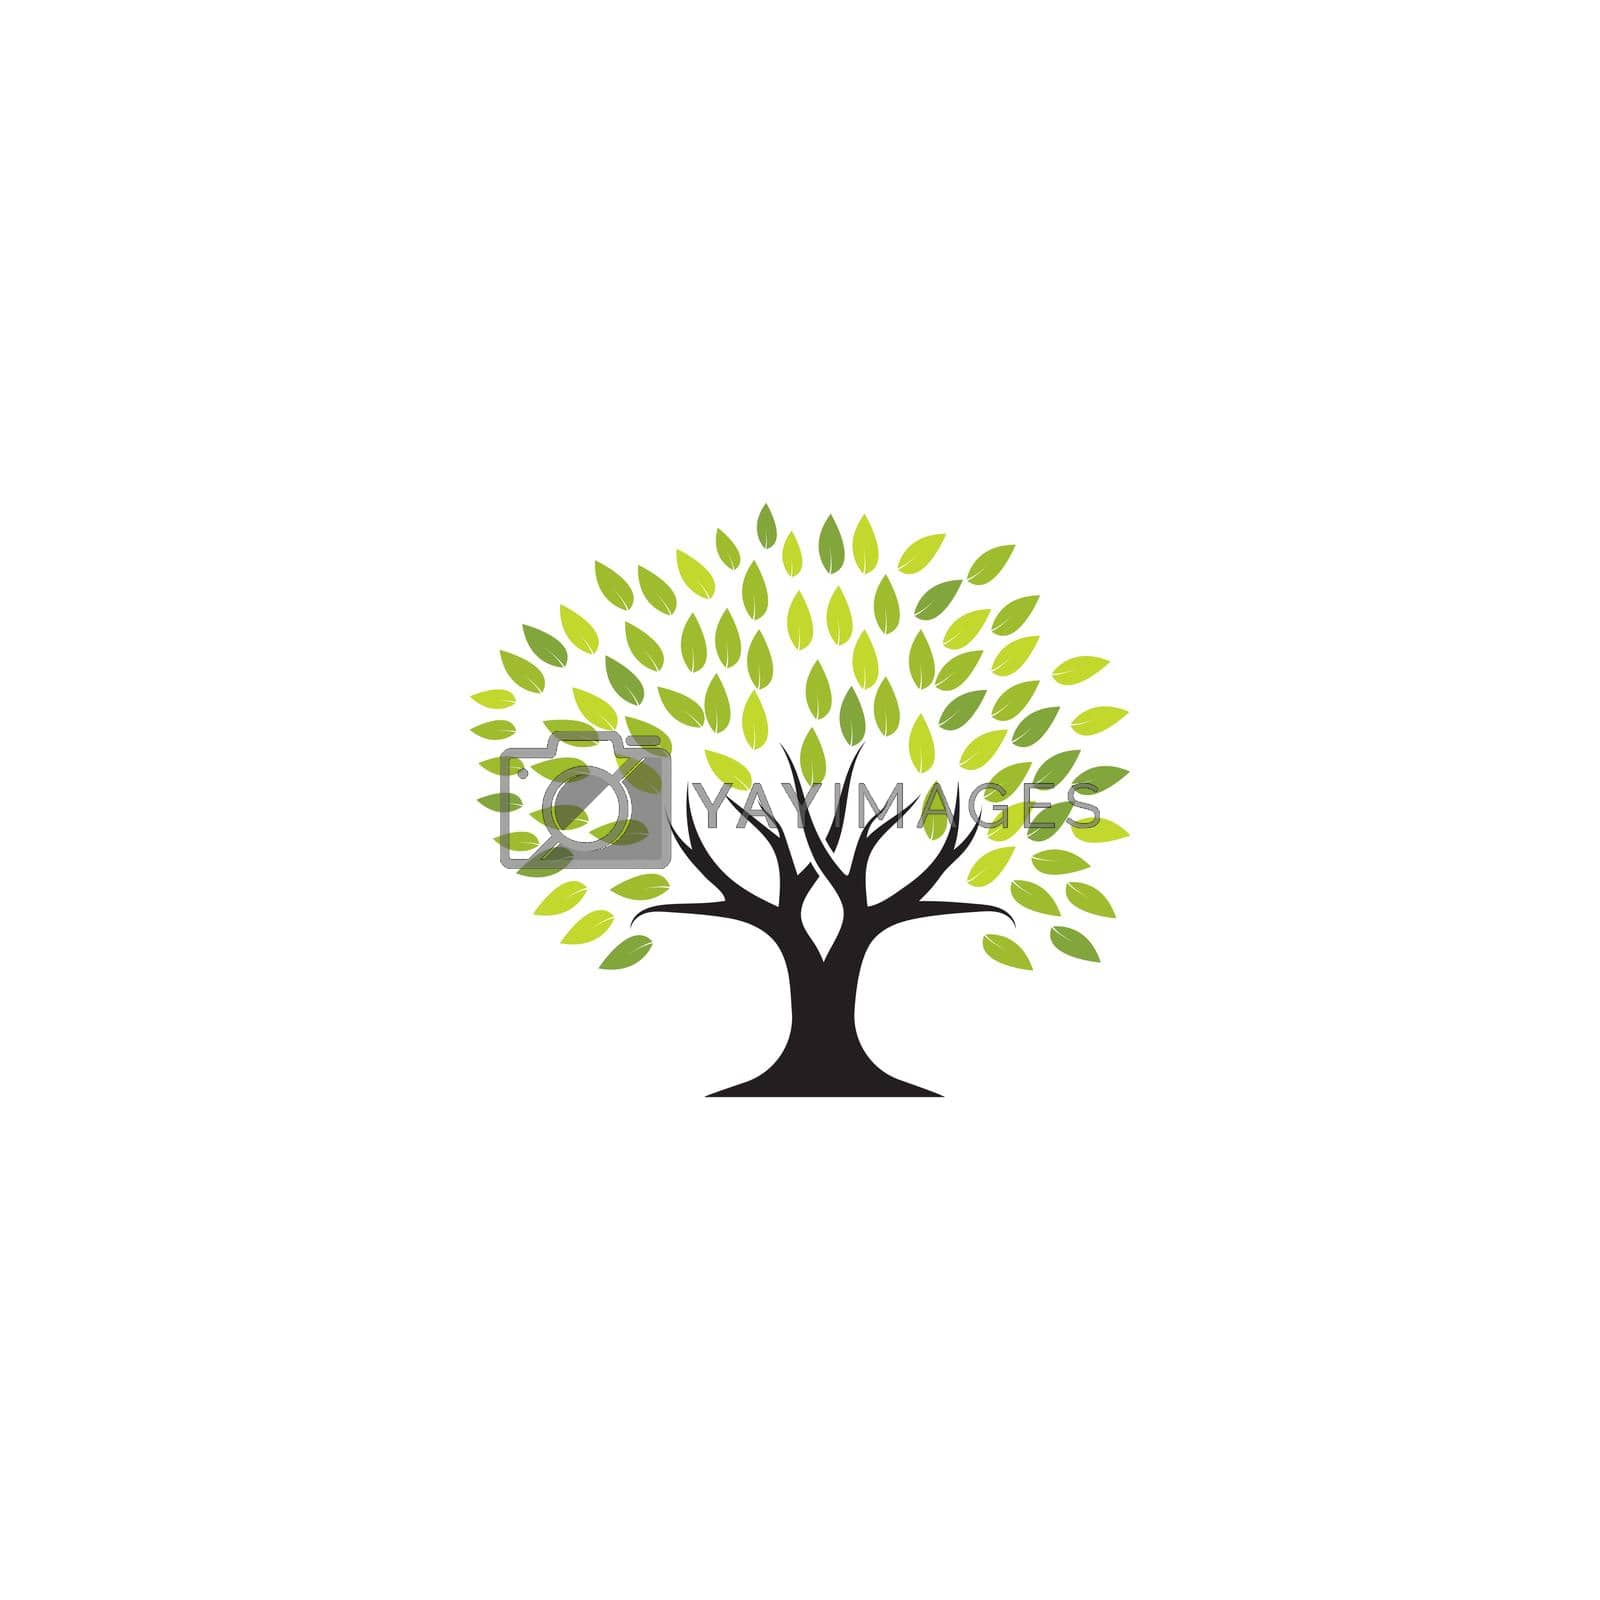 Royalty free image of Tree logo template by awk